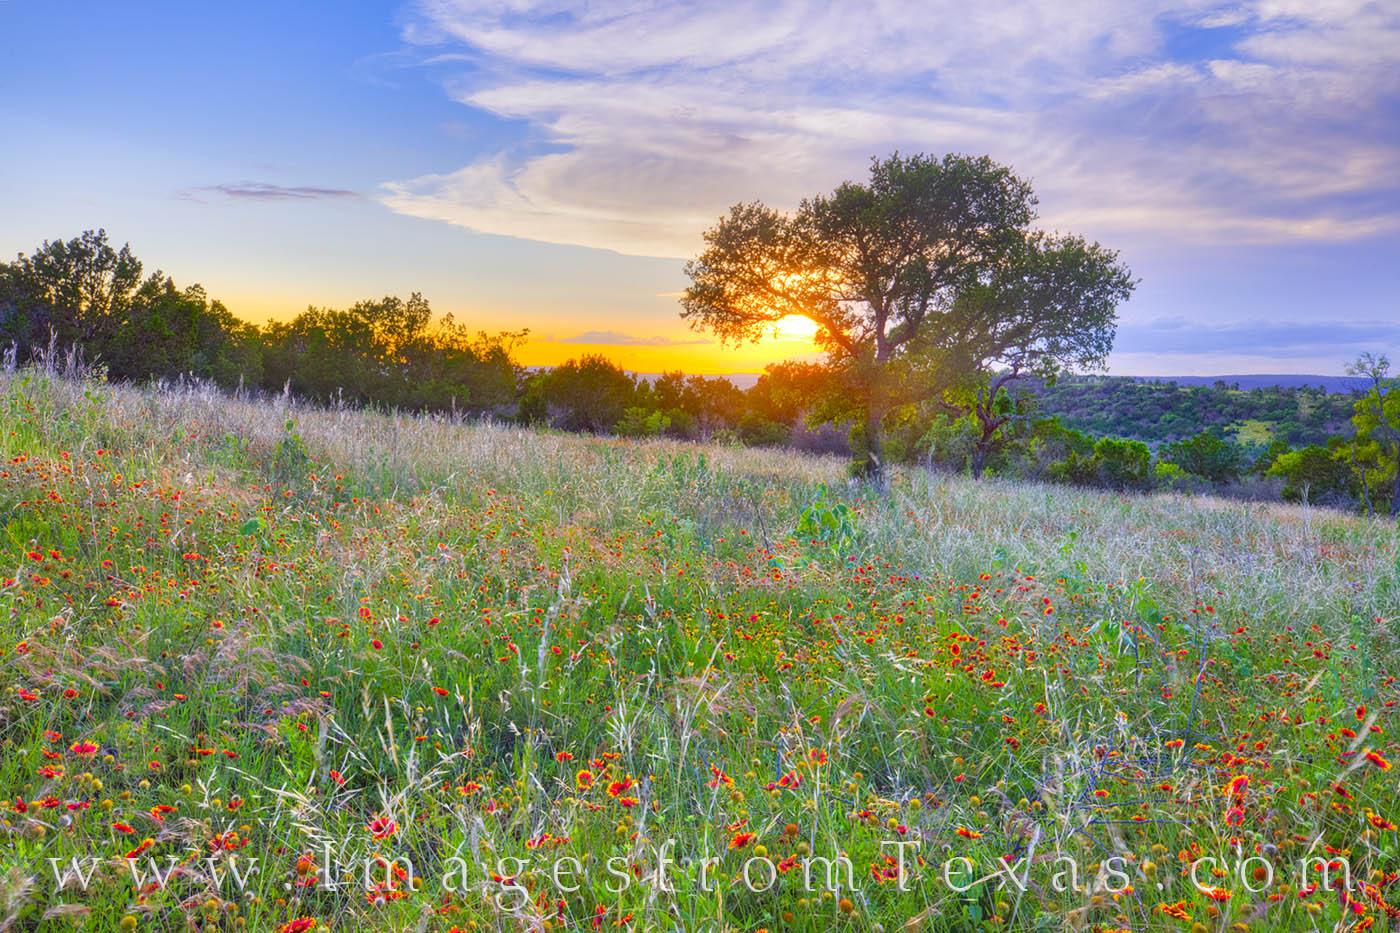 North of Marble Falls, a small field of red Indian Blankets adds color to a lush, green landscape on a late May evening. Taken...